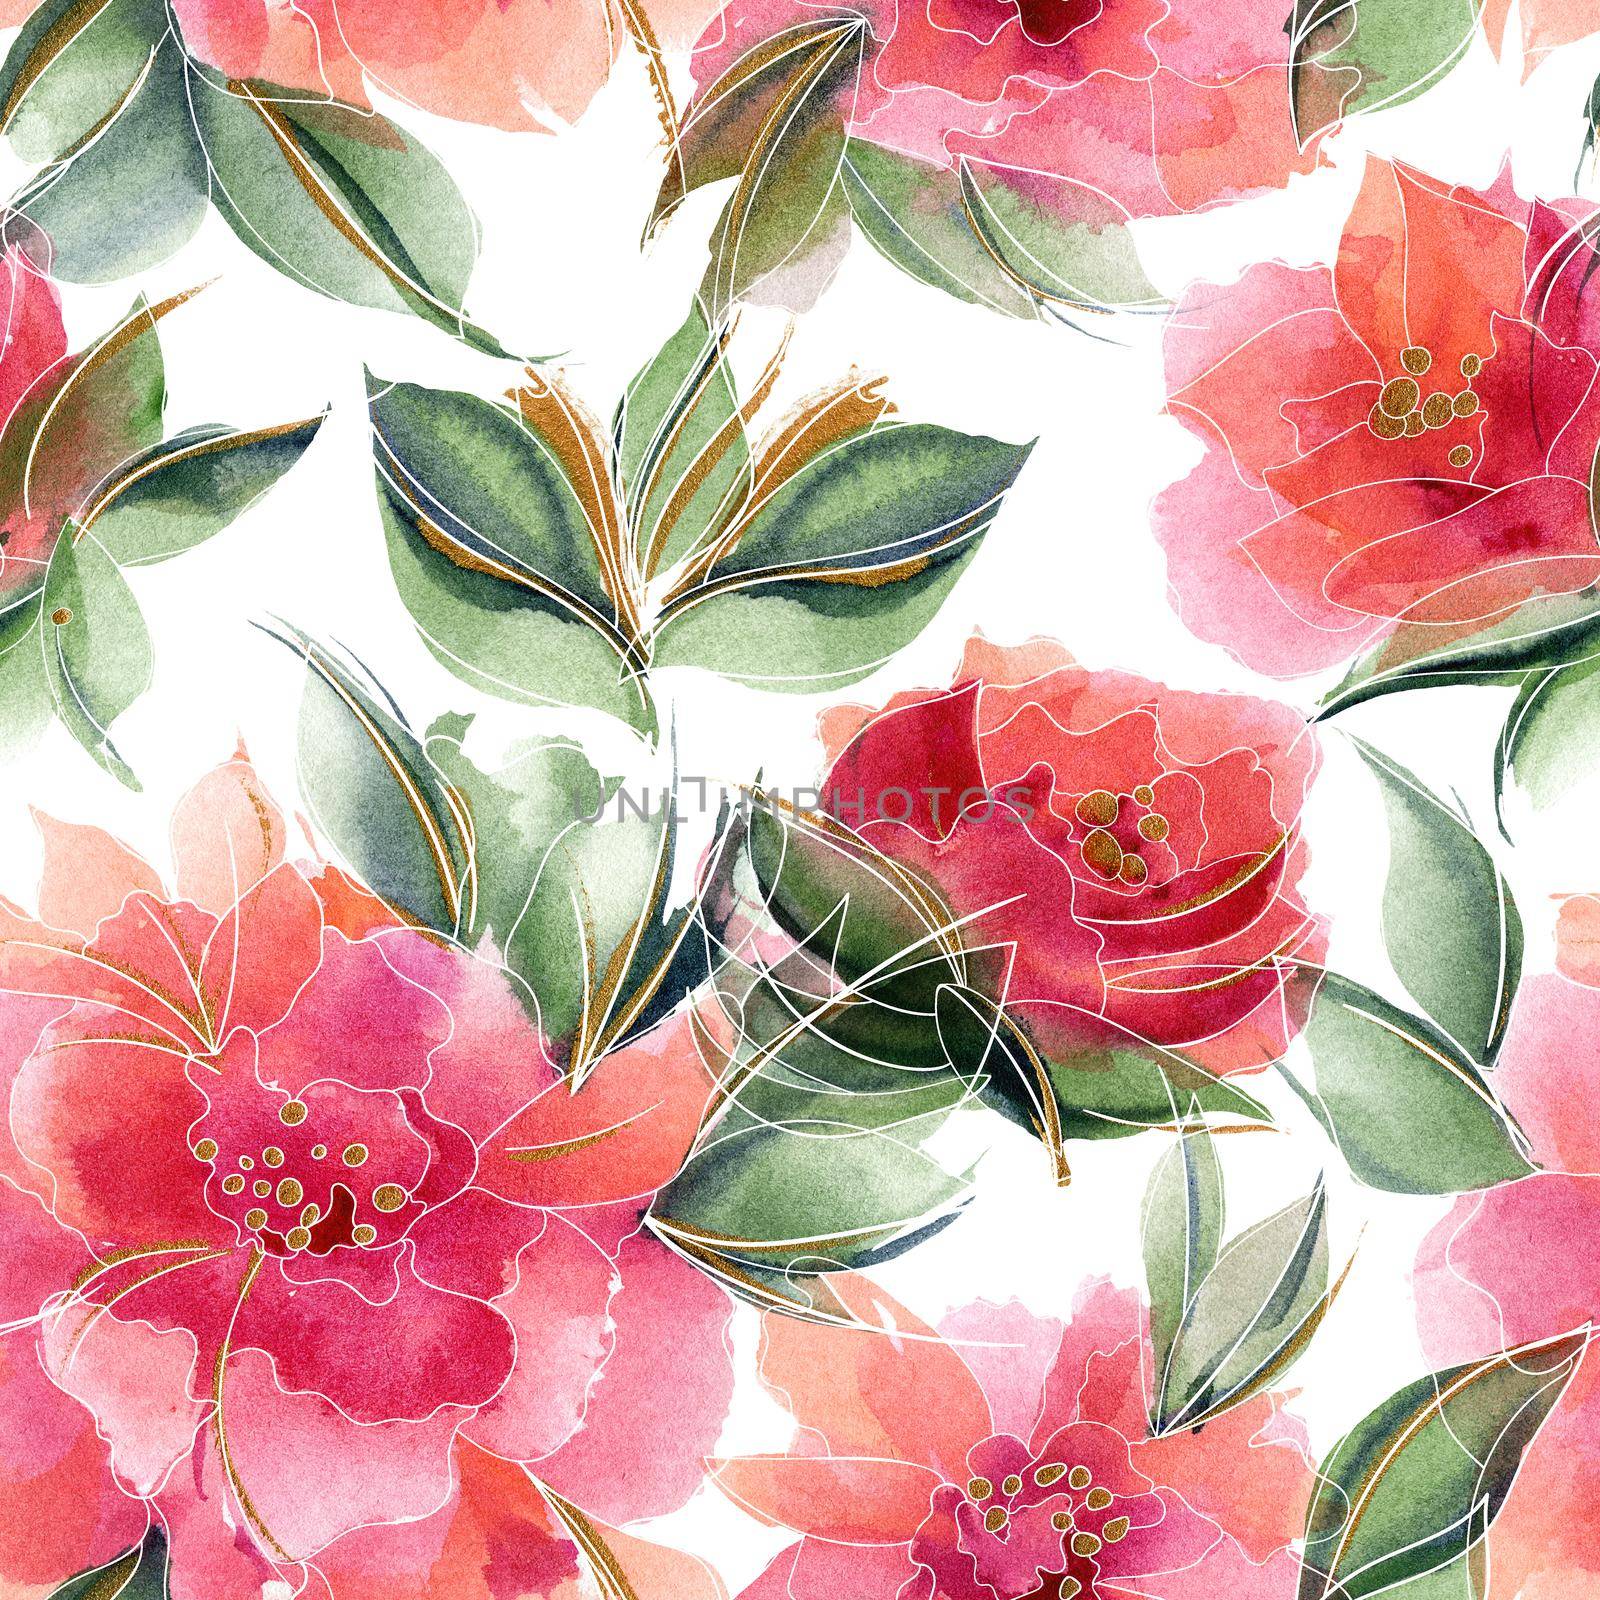 Pink floral seamless pattern with ditsy fragrant flowers by Xeniasnowstorm